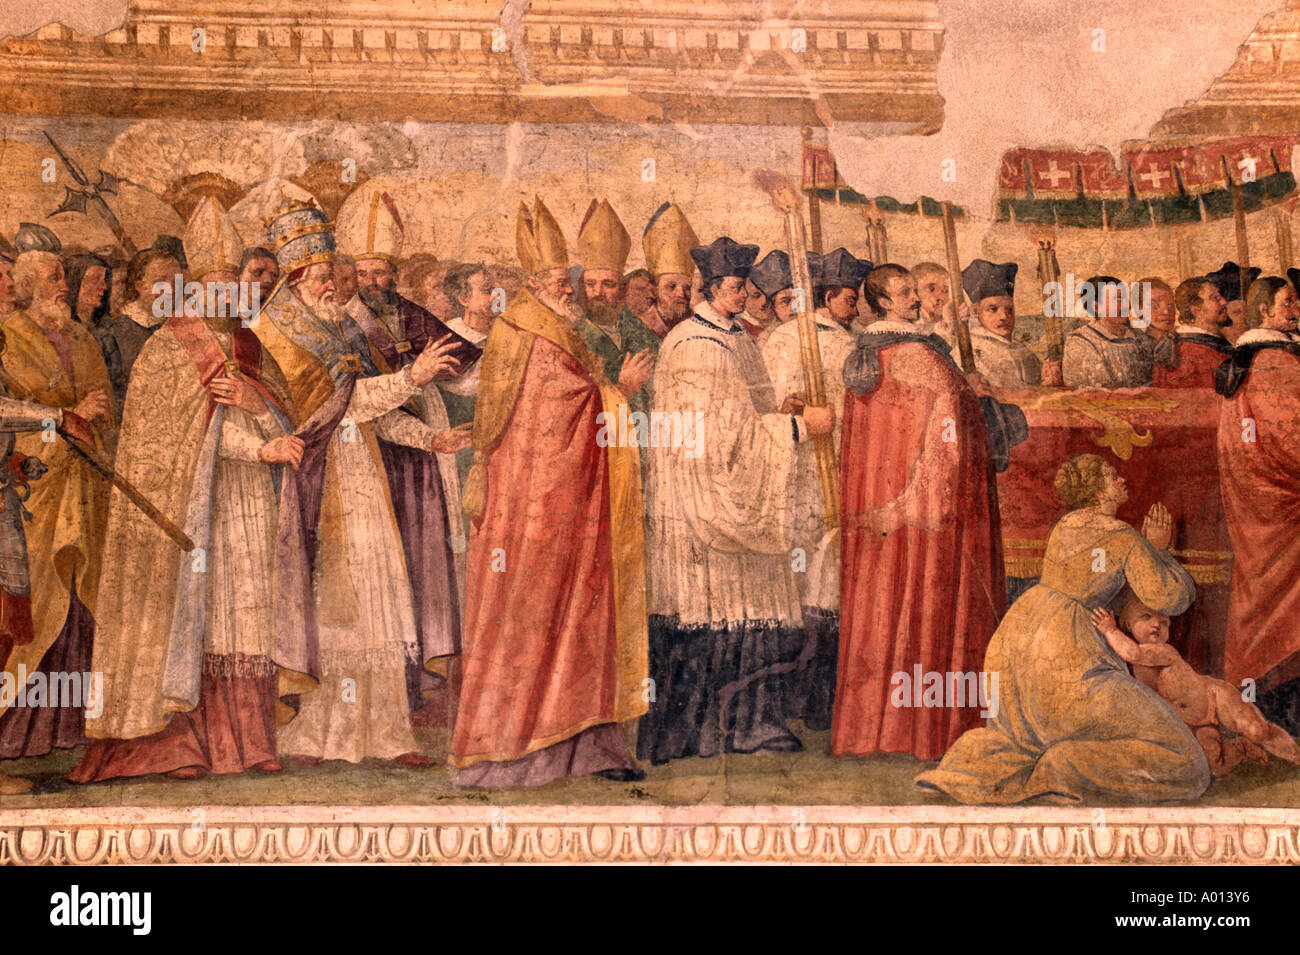 Painting of Procession of Pope Lucio the Third 1183 AD in the Medieval CHURCH OF SANTA MARIA MAGGIORE TUSCANIA TUSCANY ITALY Stock Photo